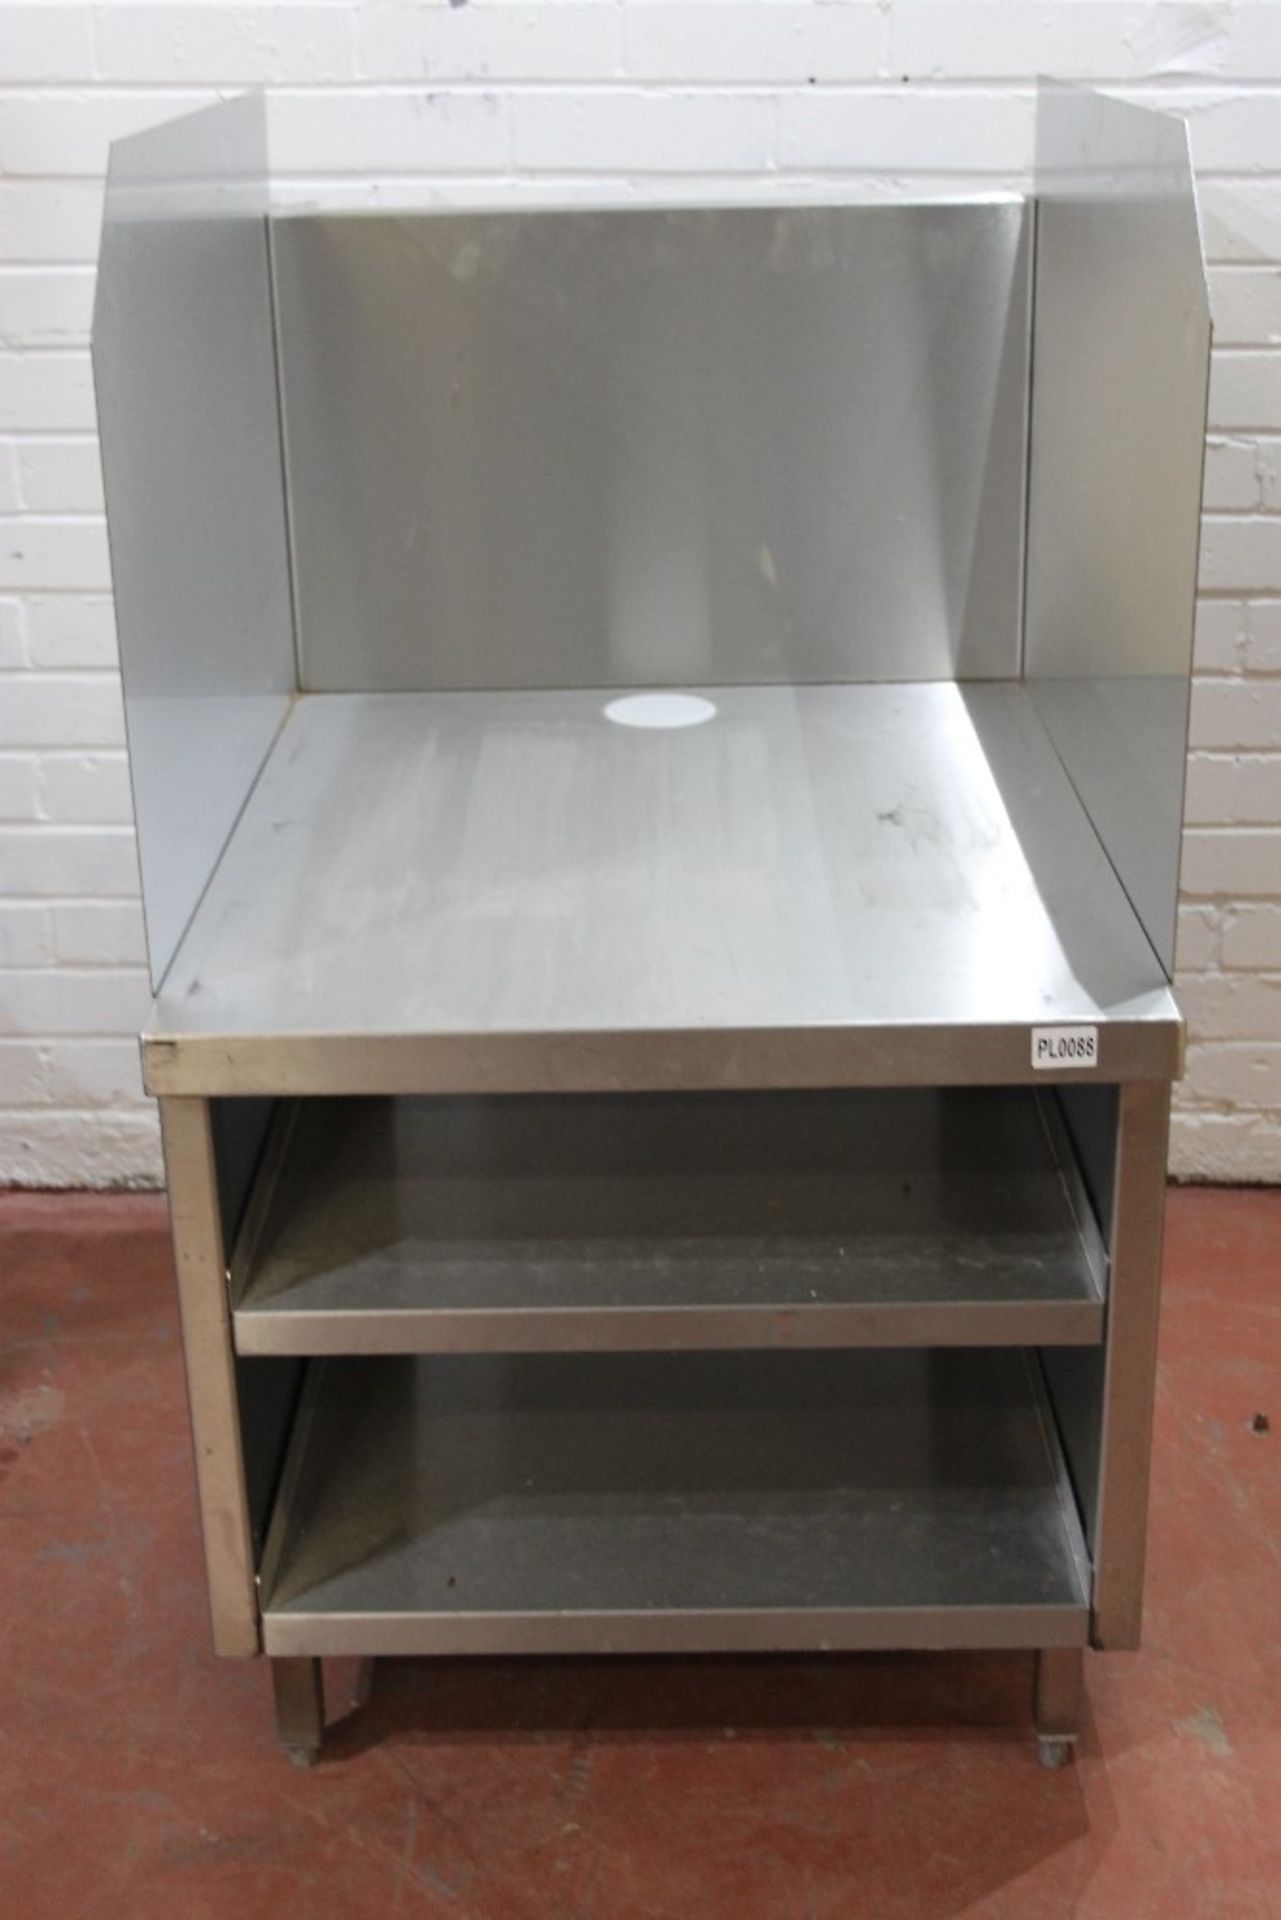 Stainless Steel Appliance Stand for Grill / Coffee Machine etc – 2 Shelves – W63cm x H110cm x - Image 3 of 3